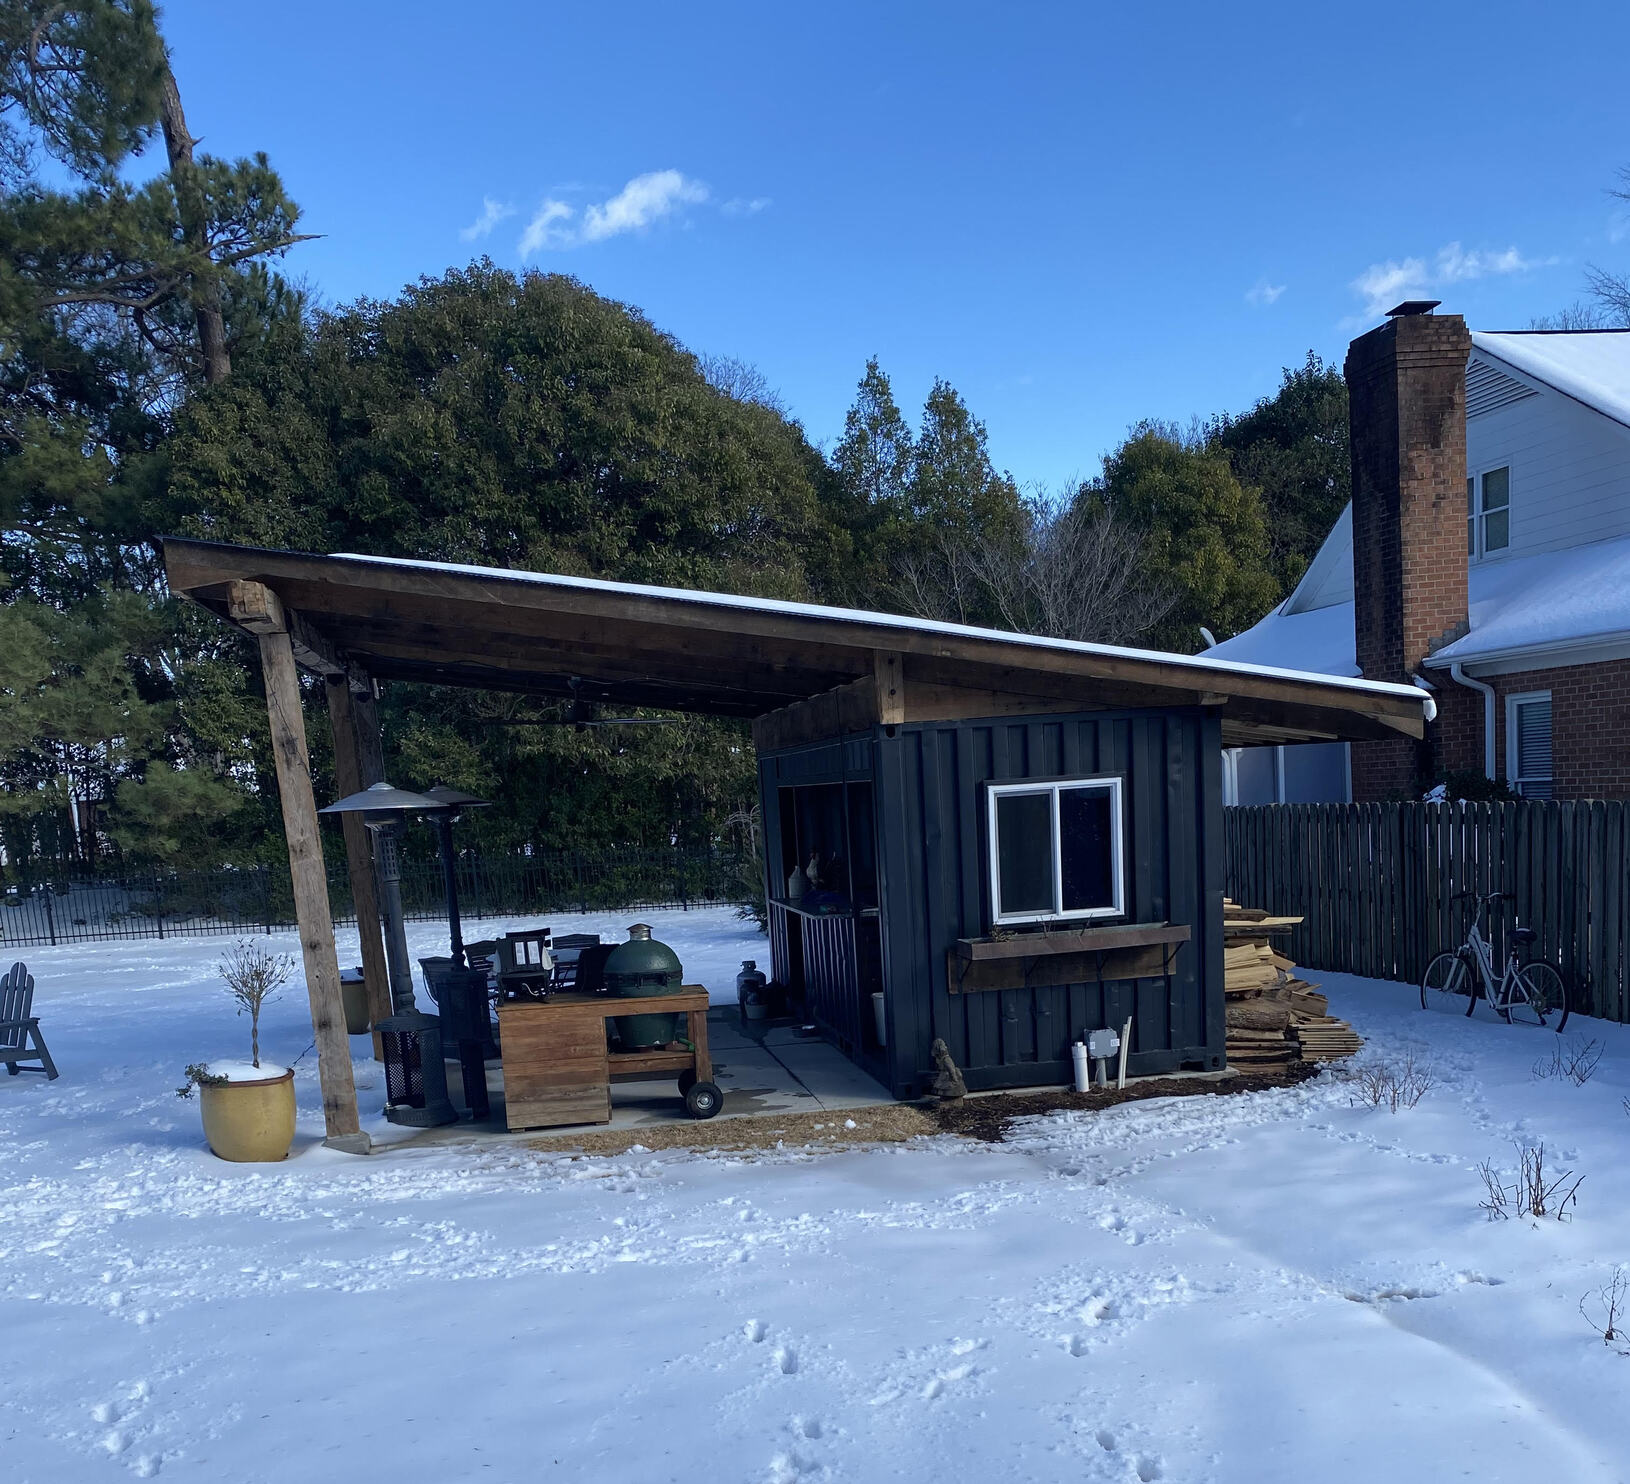 Bar in the snow